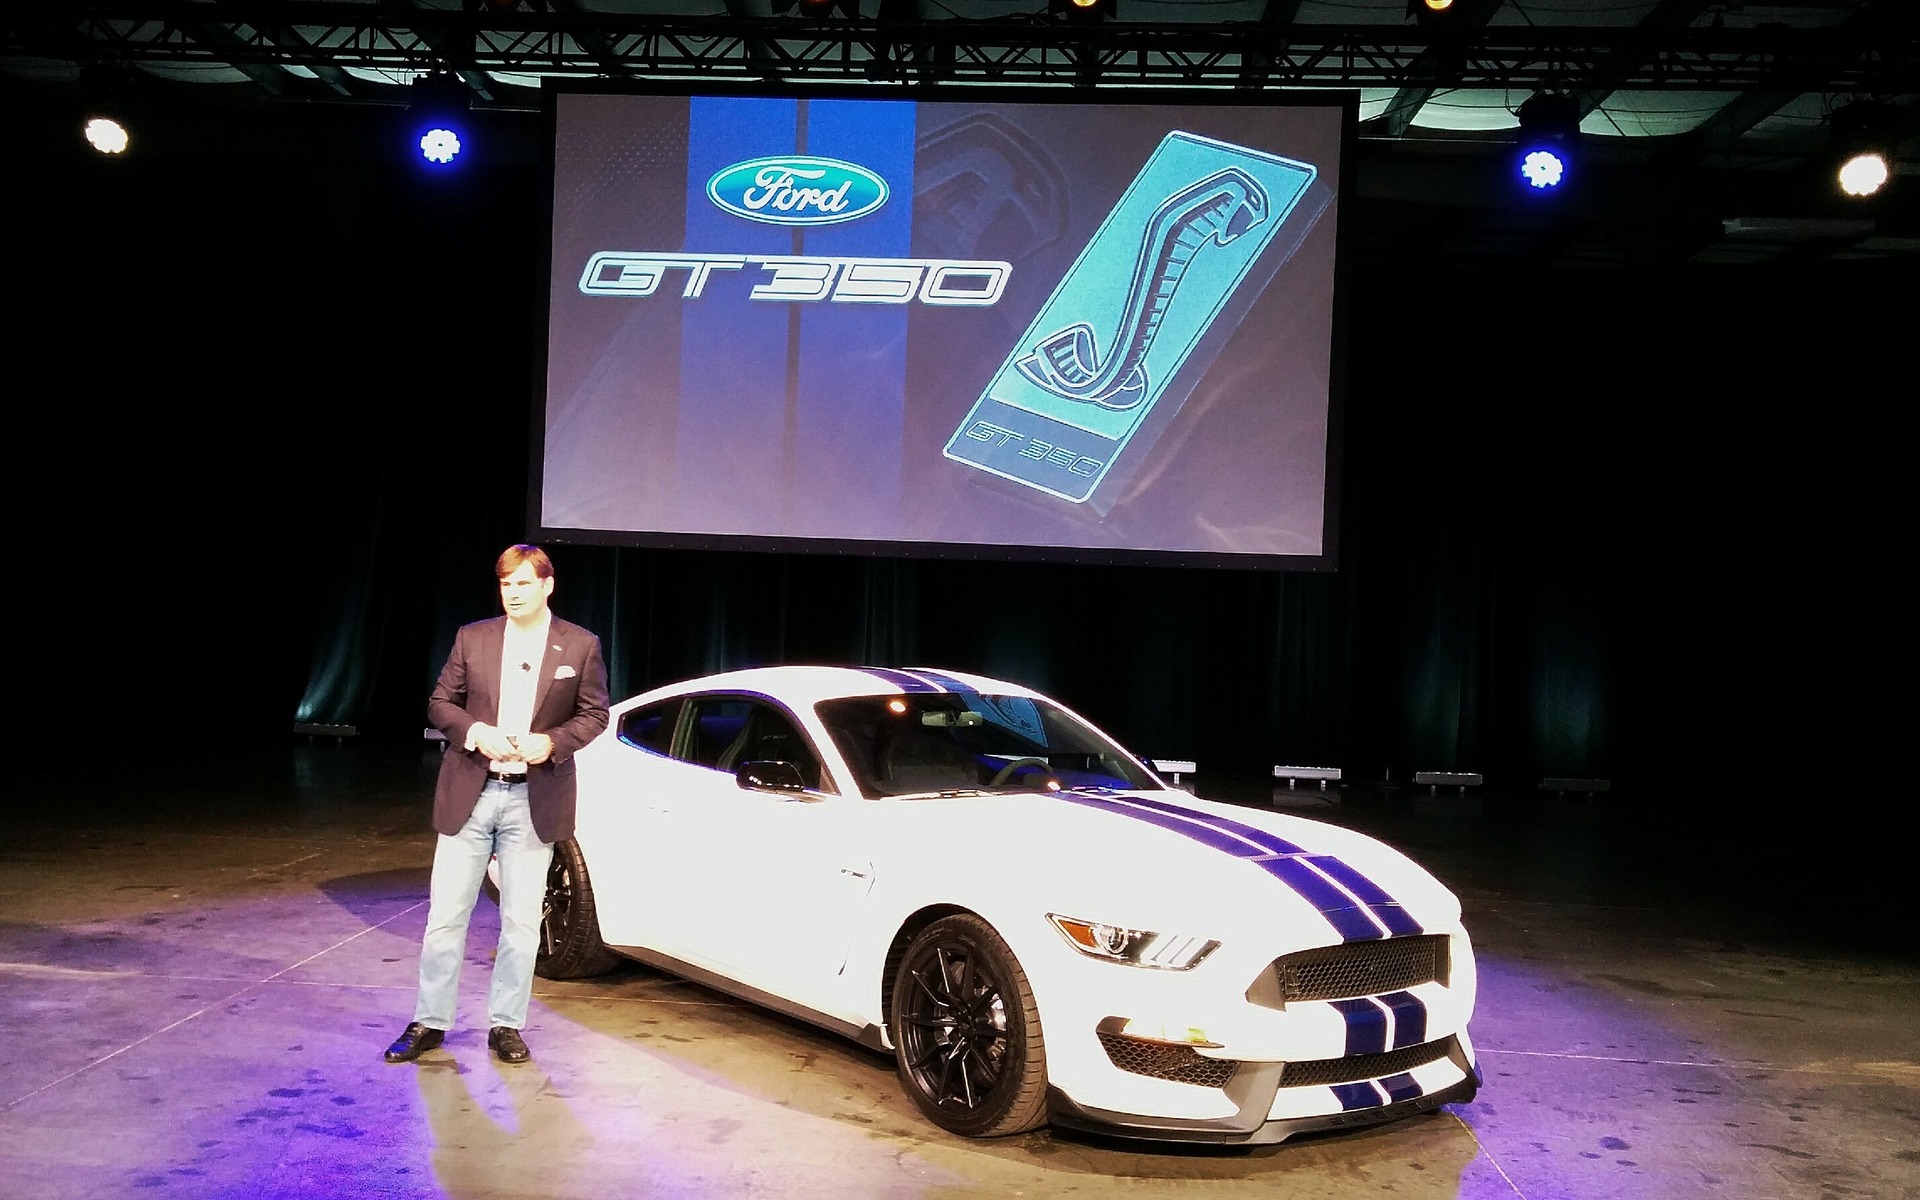 The 2015 Ford Mustang GT350.